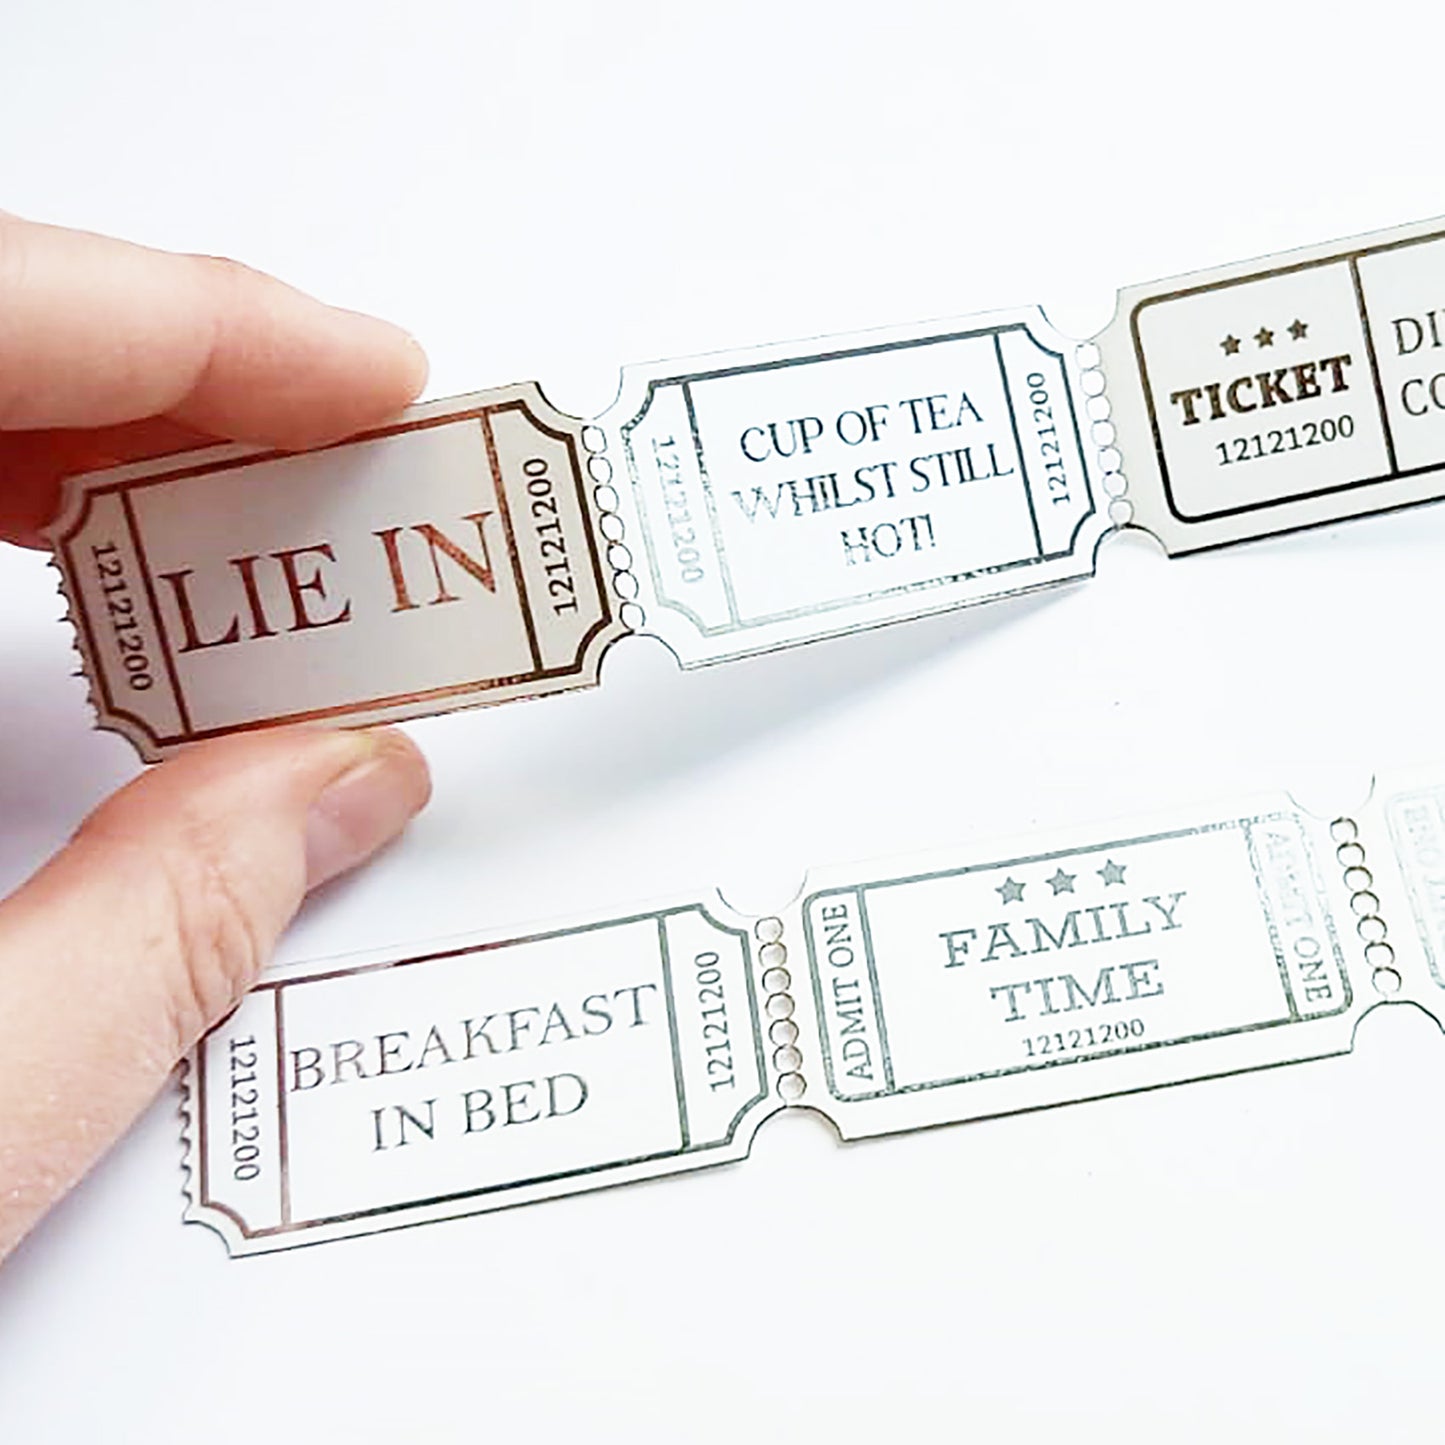 silver mother's day token tickets gift stub tokens thoughtful personalised mother's day gift